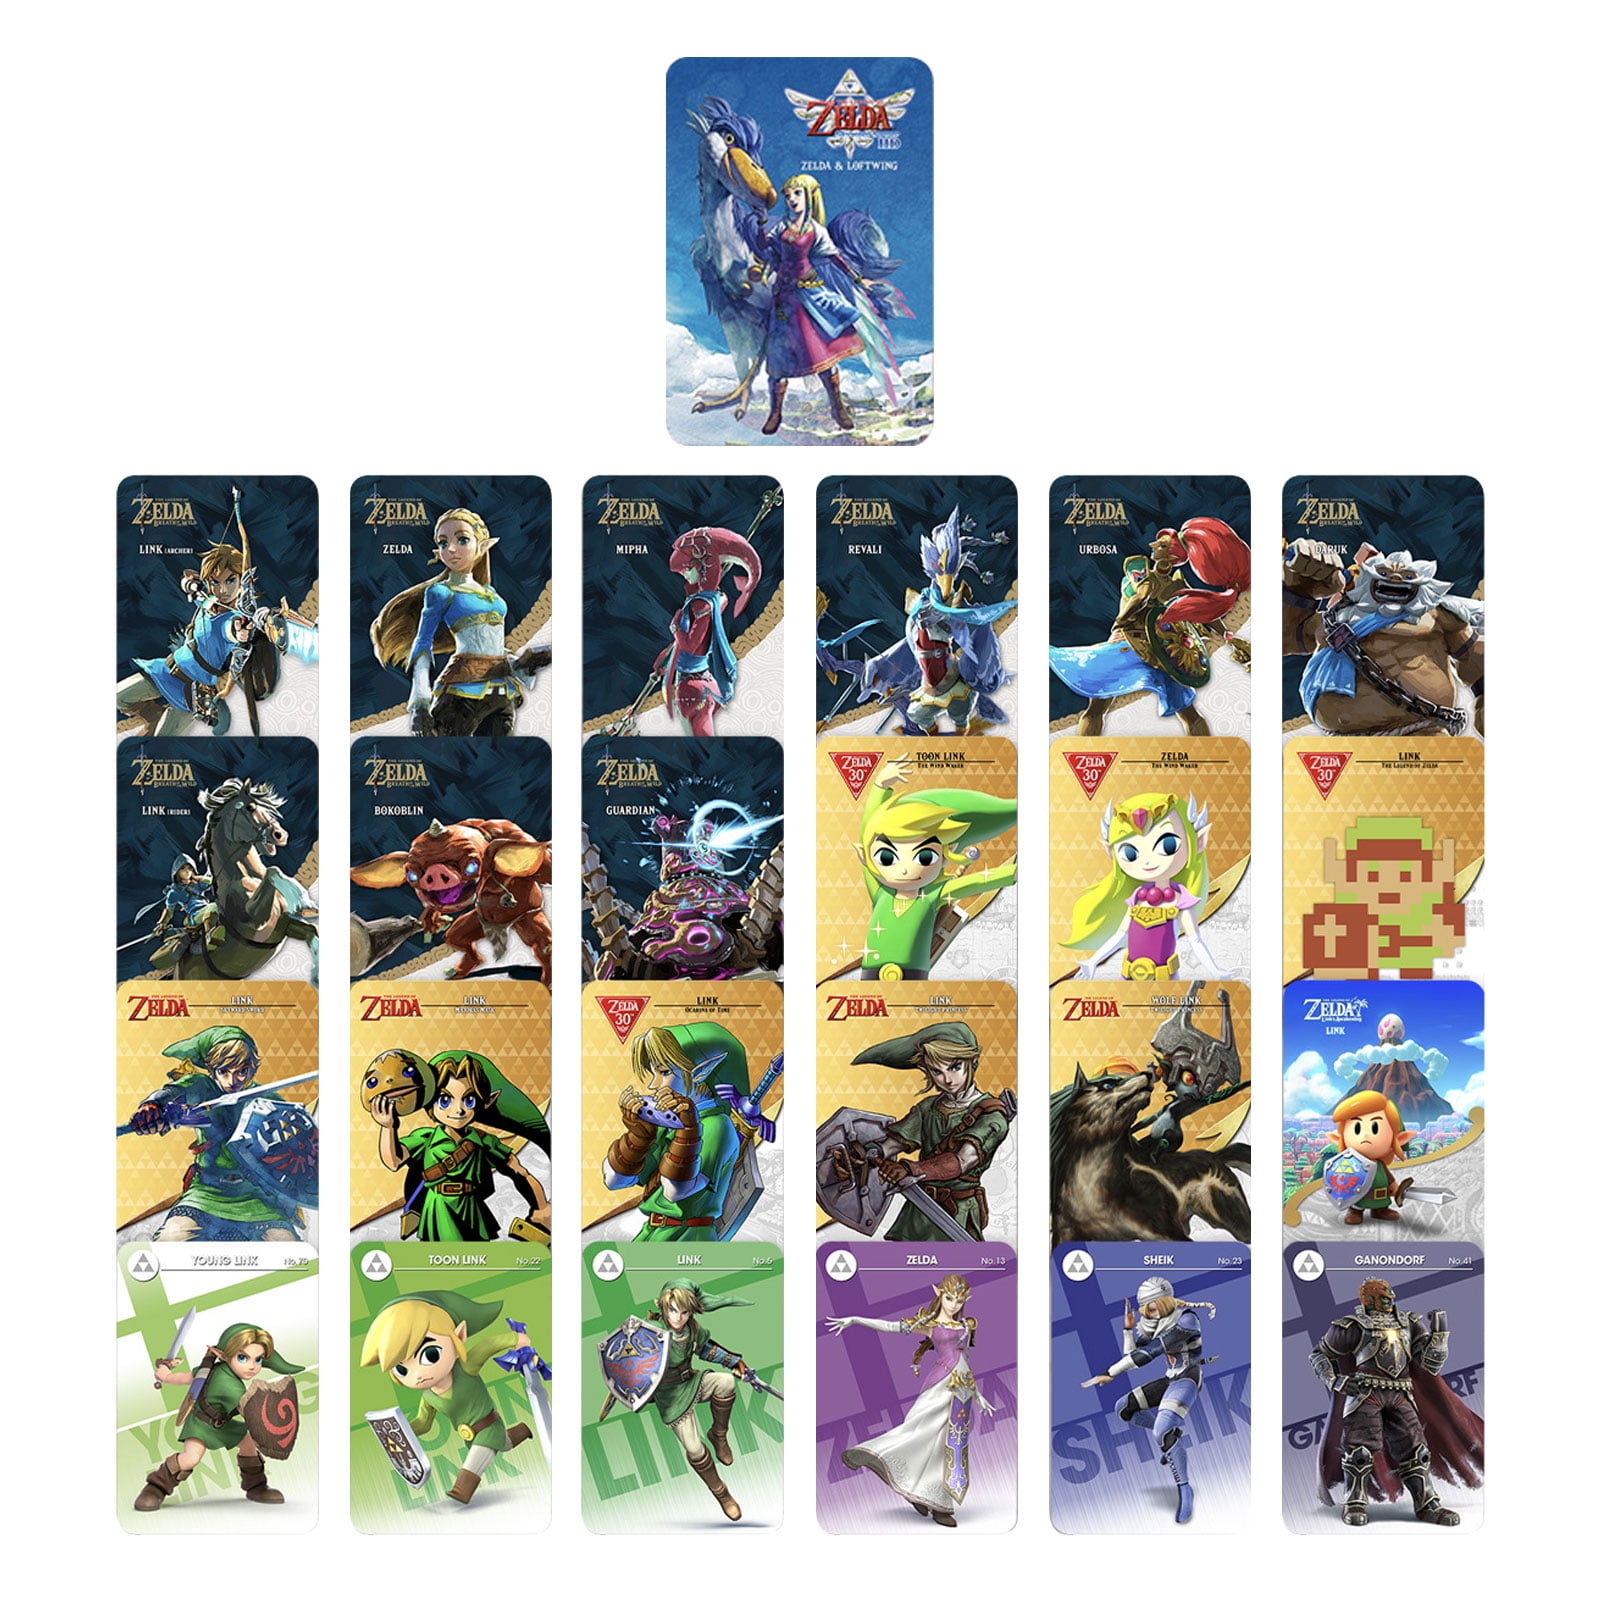 25-Pack Series Amiibo Cards, link NFC Compatible Wii U Switch Games Breathe of The Wild. - Walmart.com